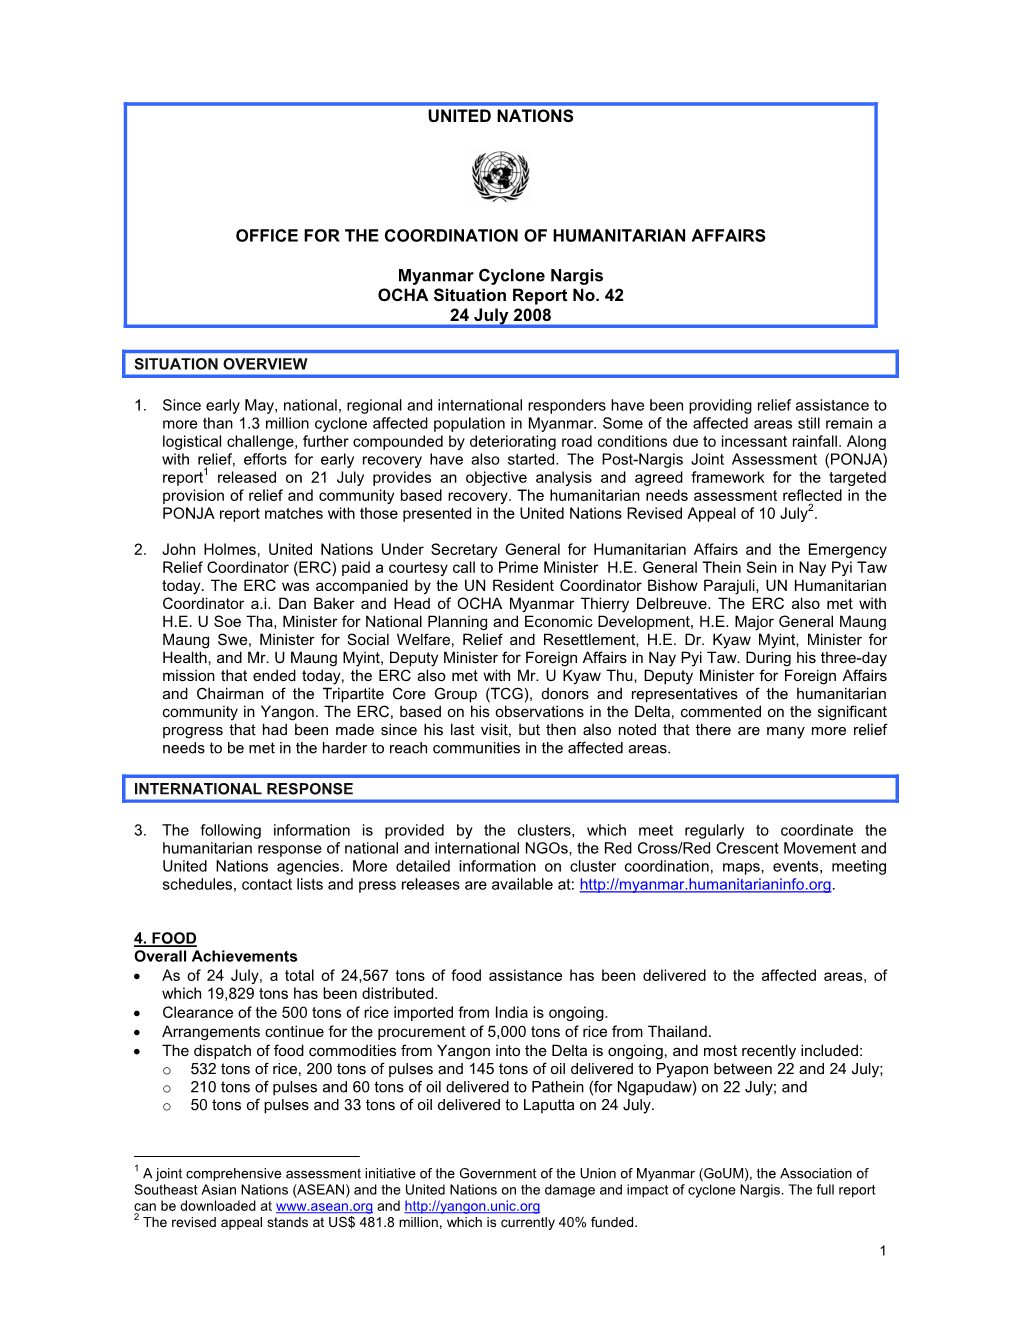 UNITED NATIONS OFFICE for the COORDINATION of HUMANITARIAN AFFAIRS Myanmar Cyclone Nargis OCHA Situation Report No. 42 24 July 2